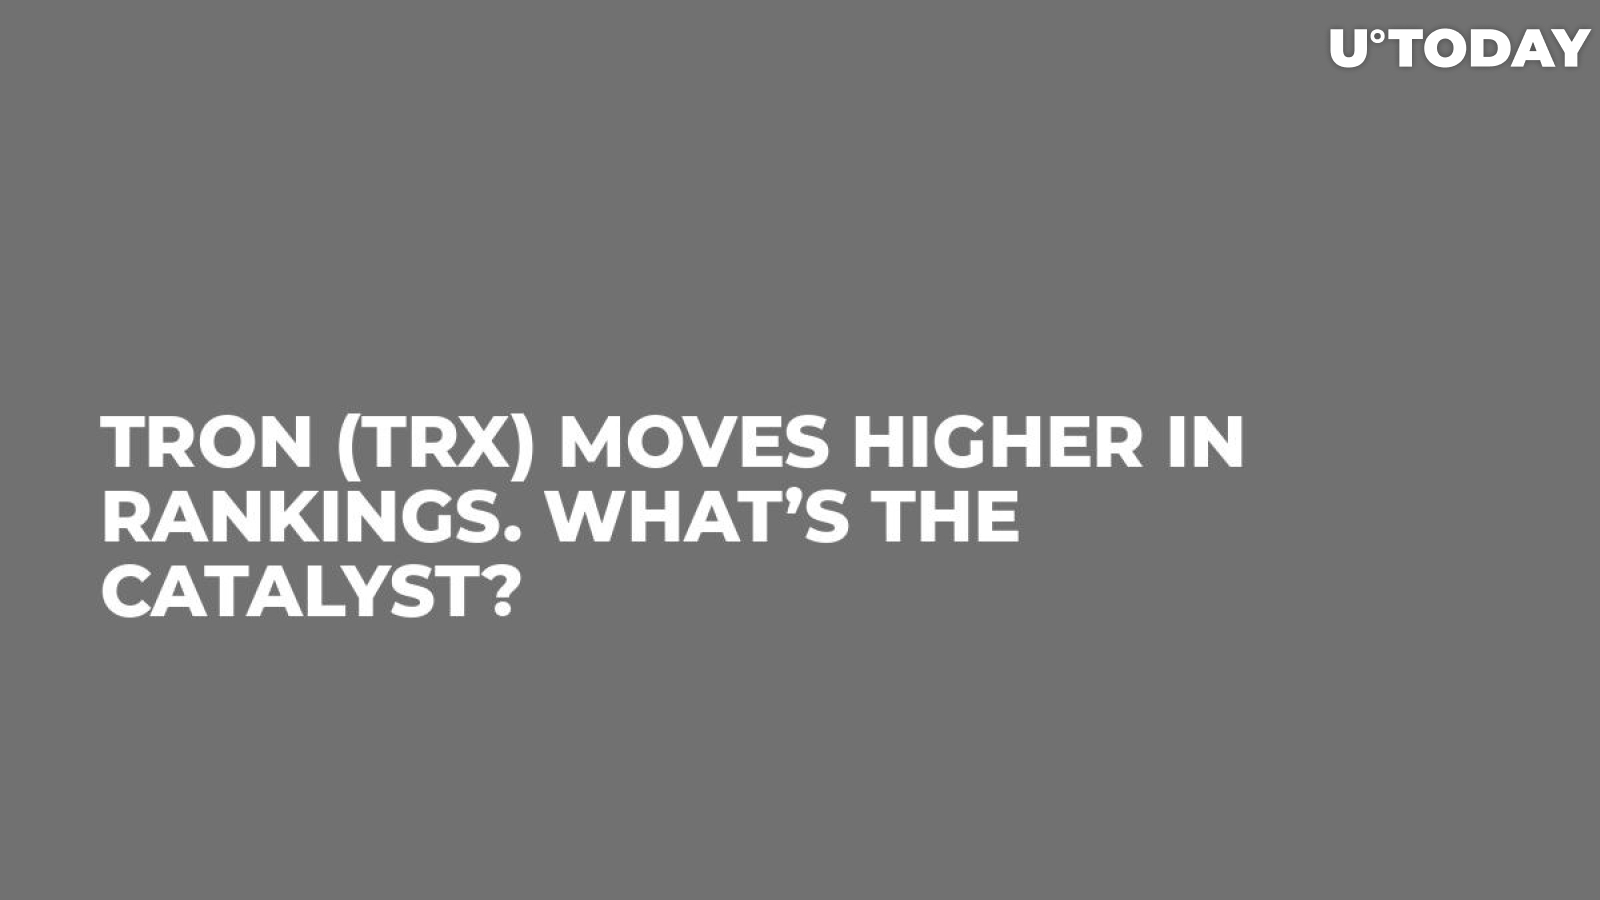 TRON (TRX) Moves Higher in Rankings. What’s the Catalyst?